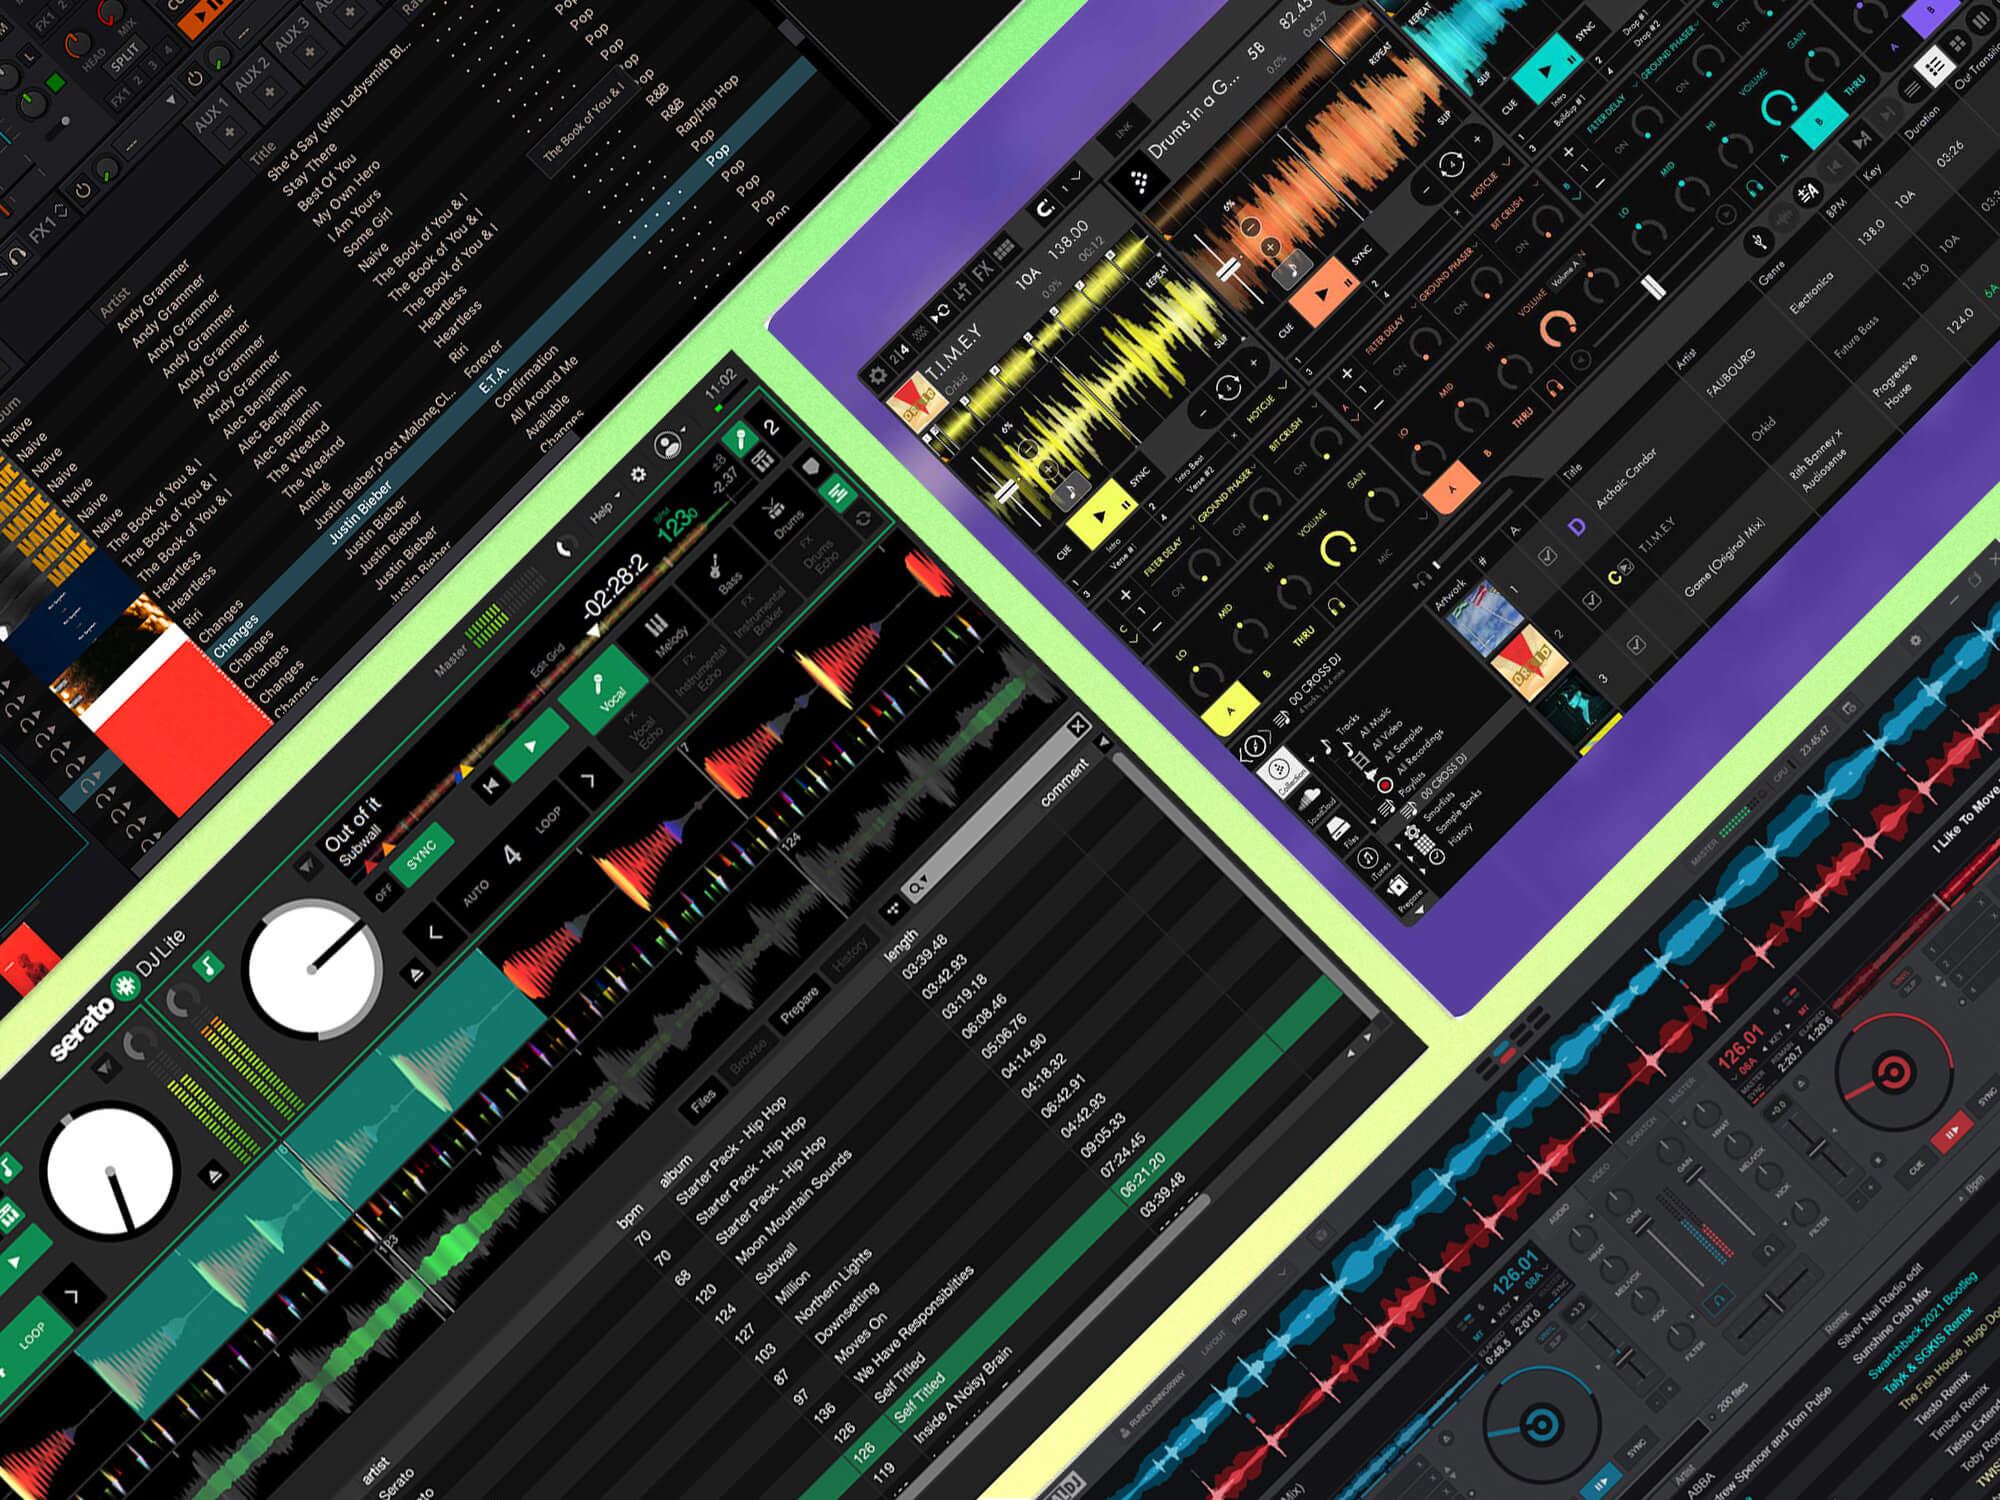 periode Belang Dekbed Best DJ plugins of 2023: Free software and apps for DJing 